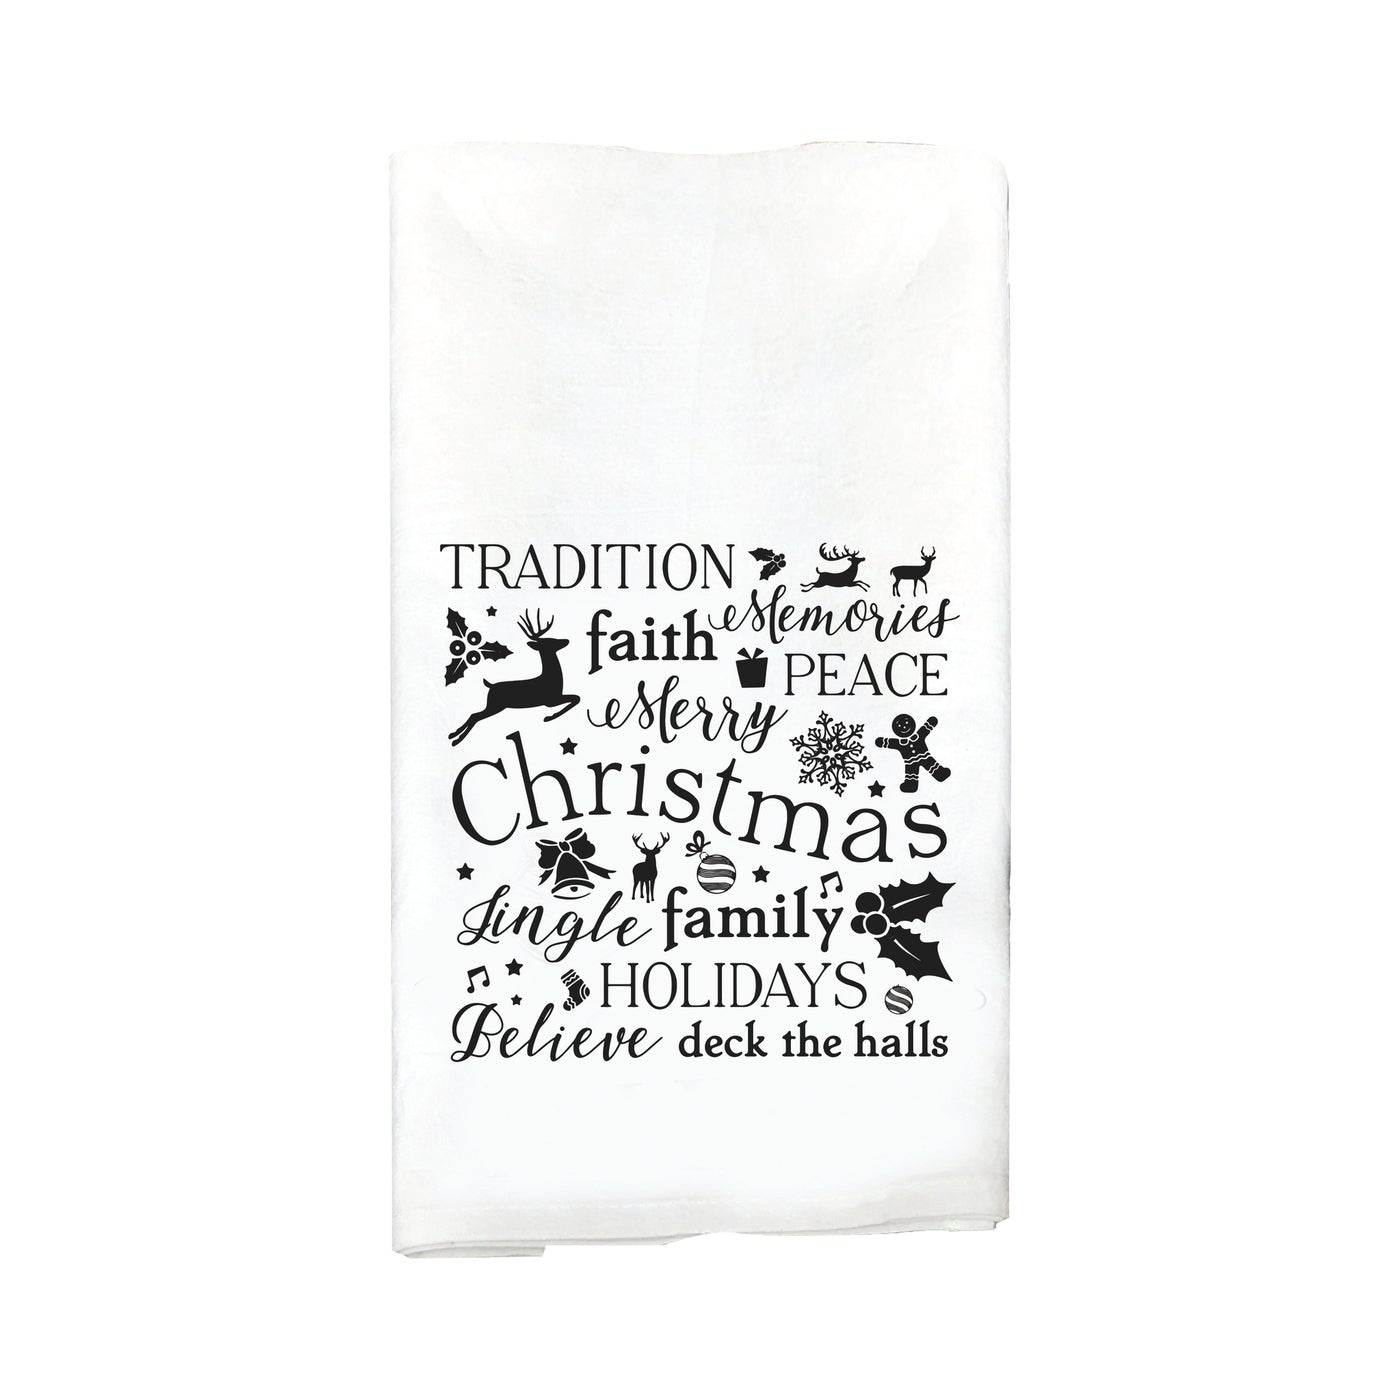 https://images.junipercdn.com/9933/TOWEL%20-%20Christmas%20Words%20Towel%20-%204CHWORD27WH_lg.jpg?height=1400&width=1400&canvas=1400,1400&fit=bounds